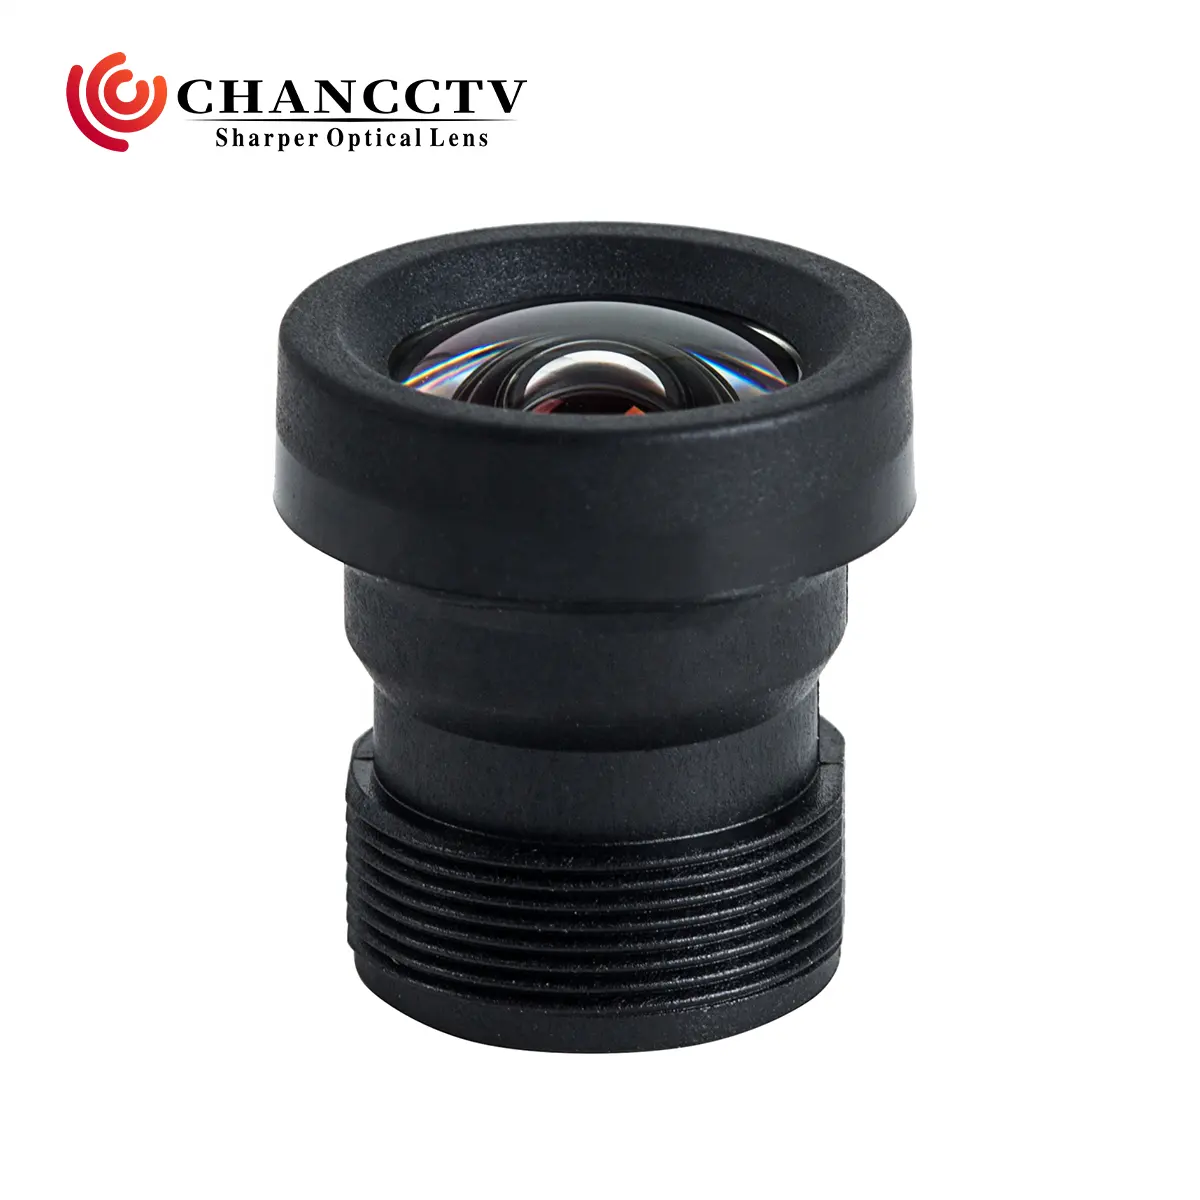 1/2.3" 12MP M12 Non Distortion Lens with IR Cut Filter 4.15mm Action Camera Lens